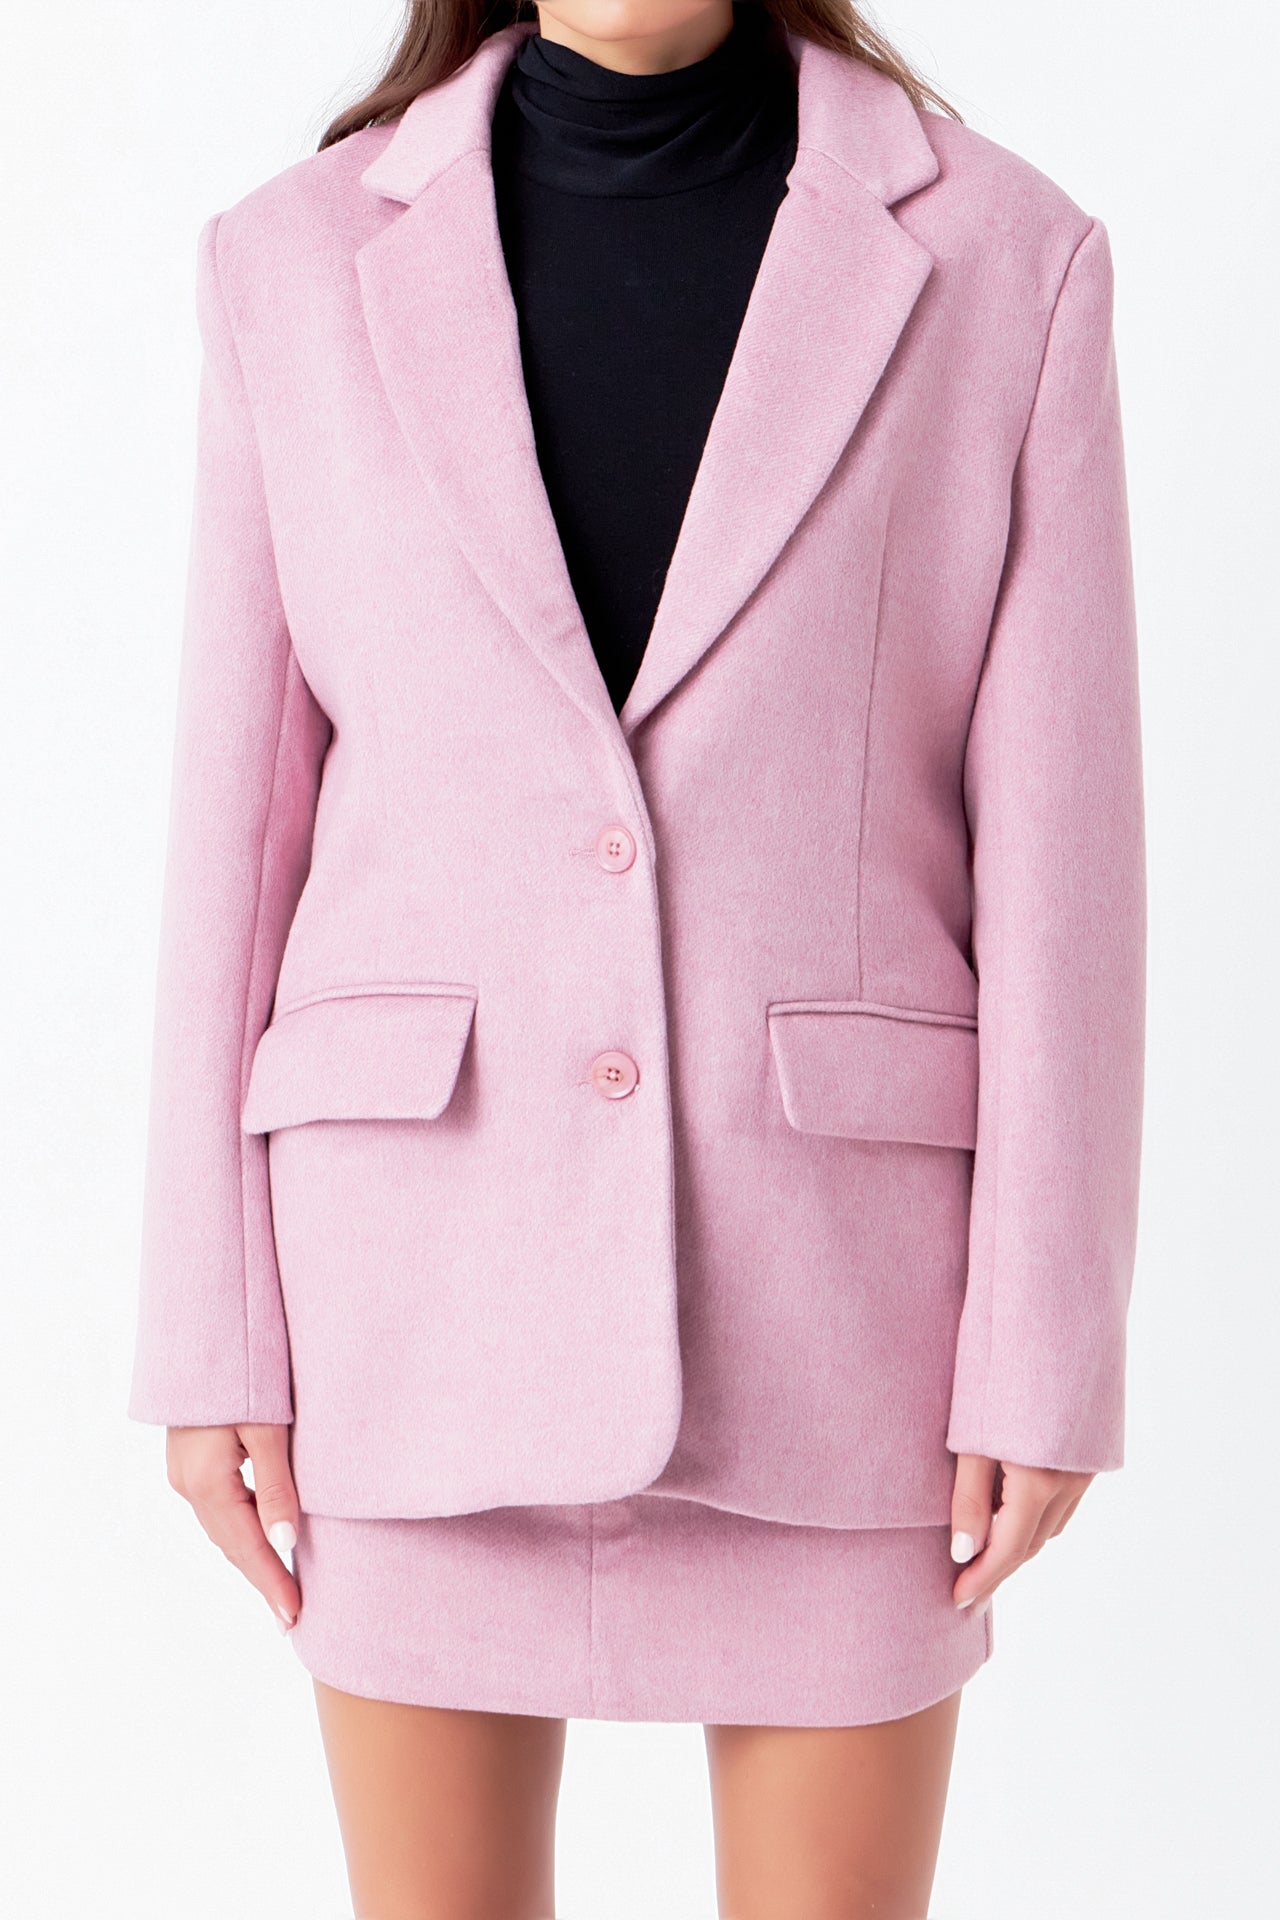 Endless Rose - Wool Boxy Oversize Blazer - Jackets in Women's Clothing available at endlessrose.com